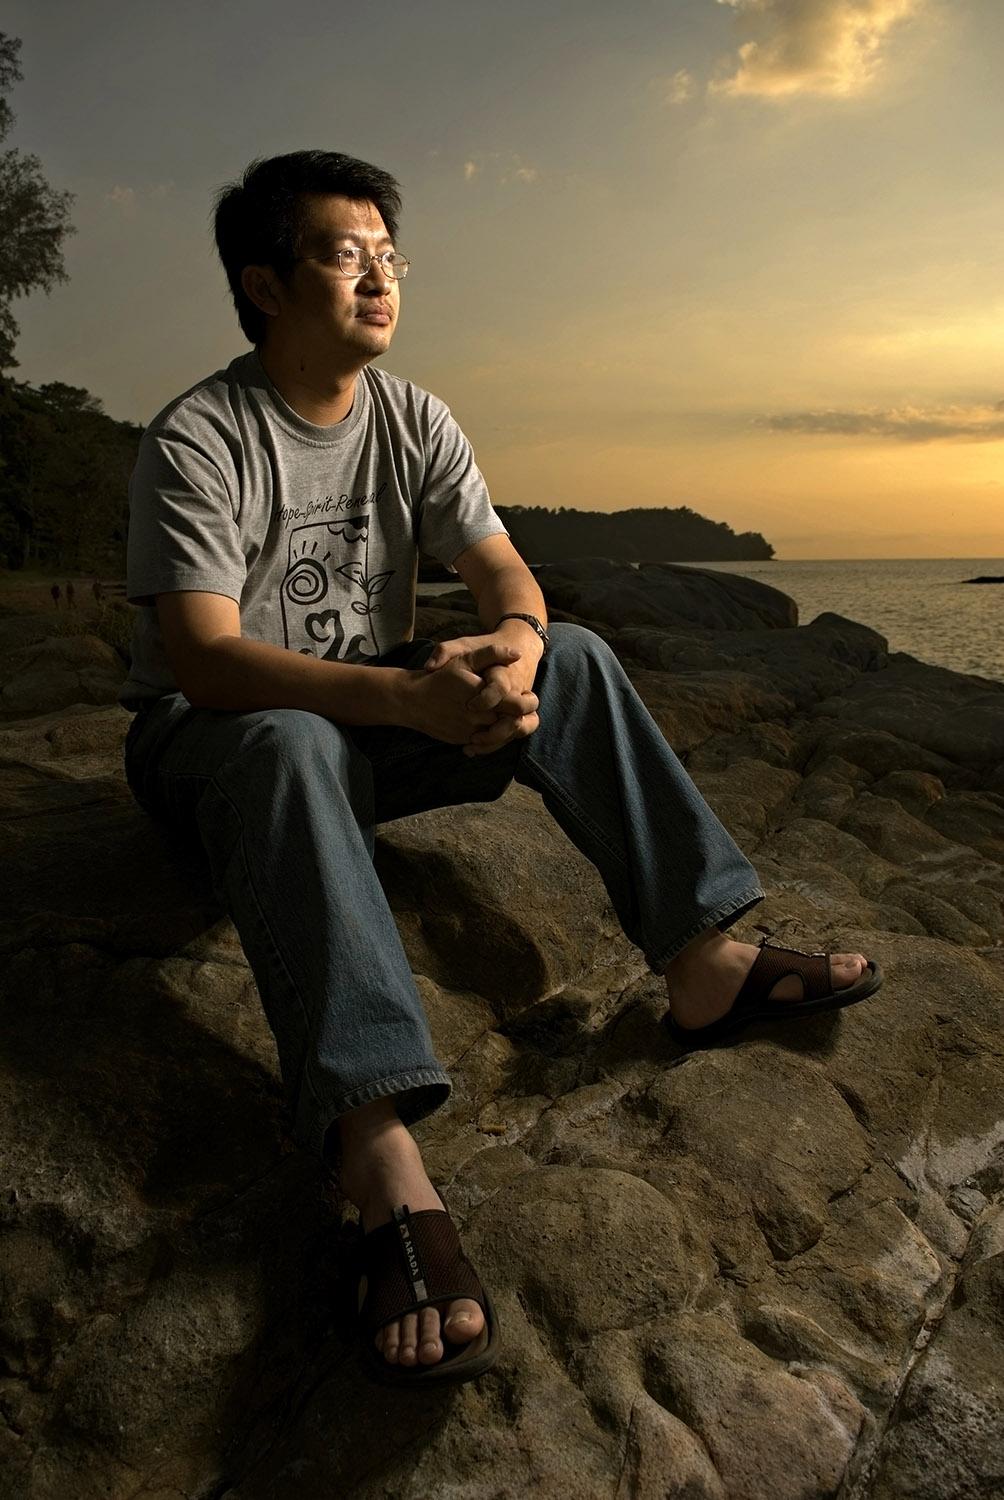 Sombat Boonngamanong, who founded the Mirror Art Group, which works with Thai hilltribe villagers and more recently the Tsunami Volunteer Center, is trying to improve disaster relief in Thailand. Here he is portrayed on the Khao Lak beach which was devastated by the Tsunami of December 2004.